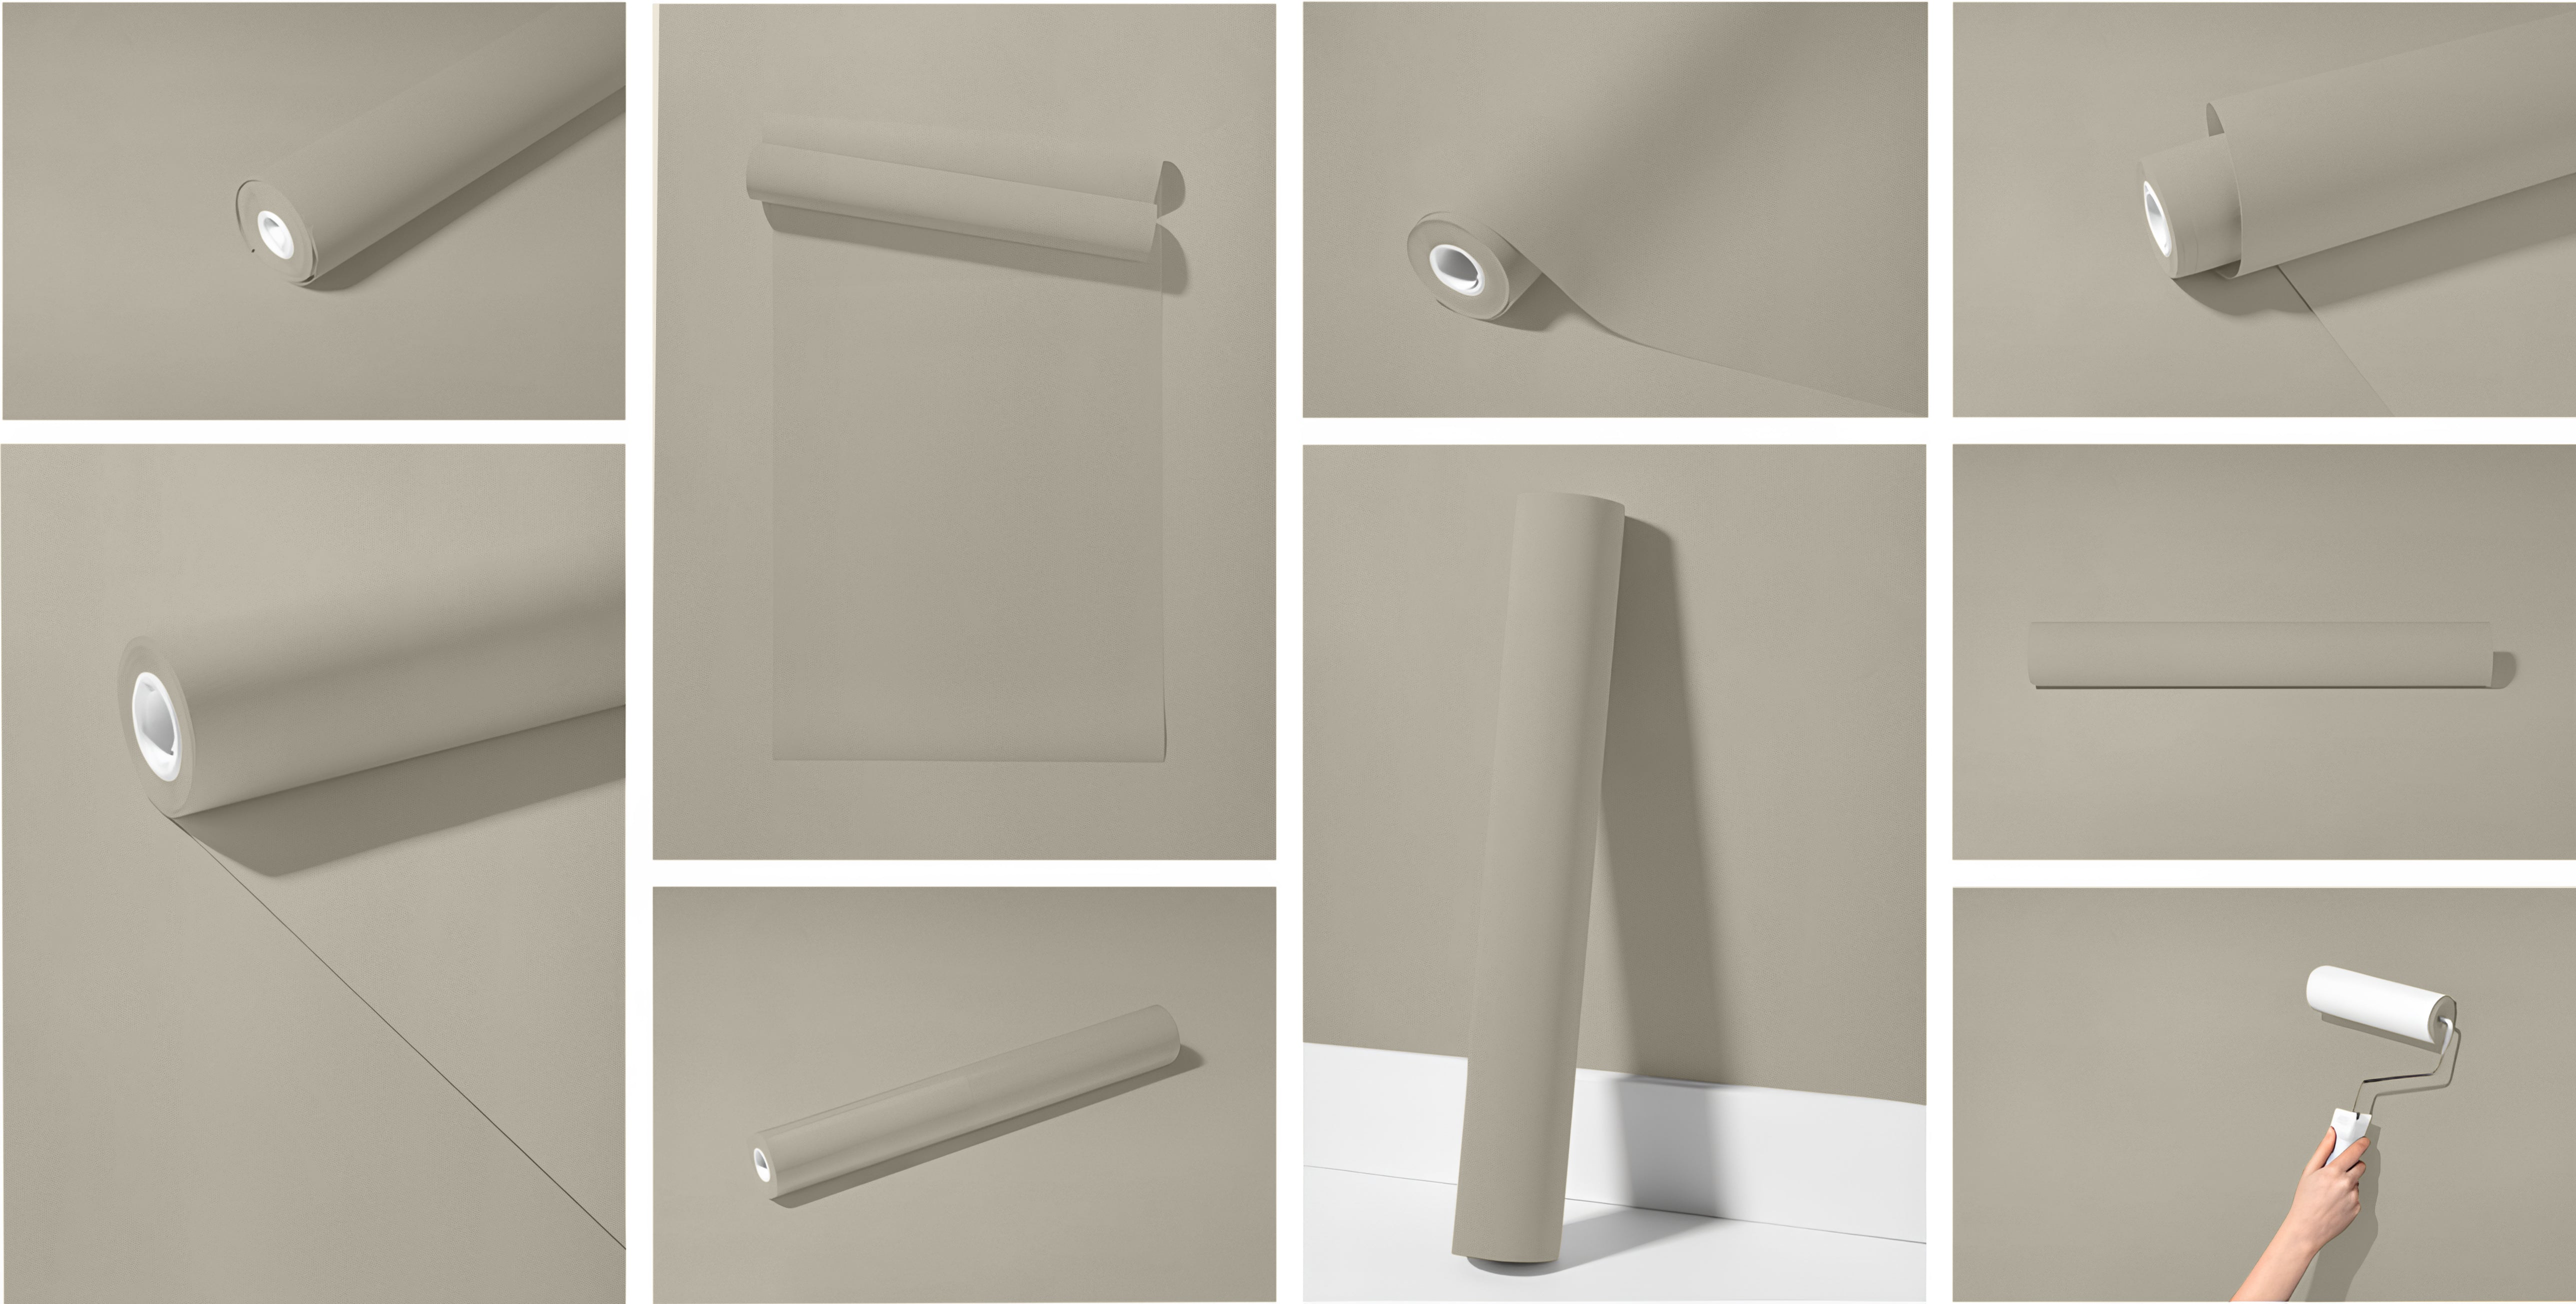 Peel & Stick Removable Re-usable Paint - Color RAL 7032 Pebble Grey - offRAL™ - RALRAW LLC, USA